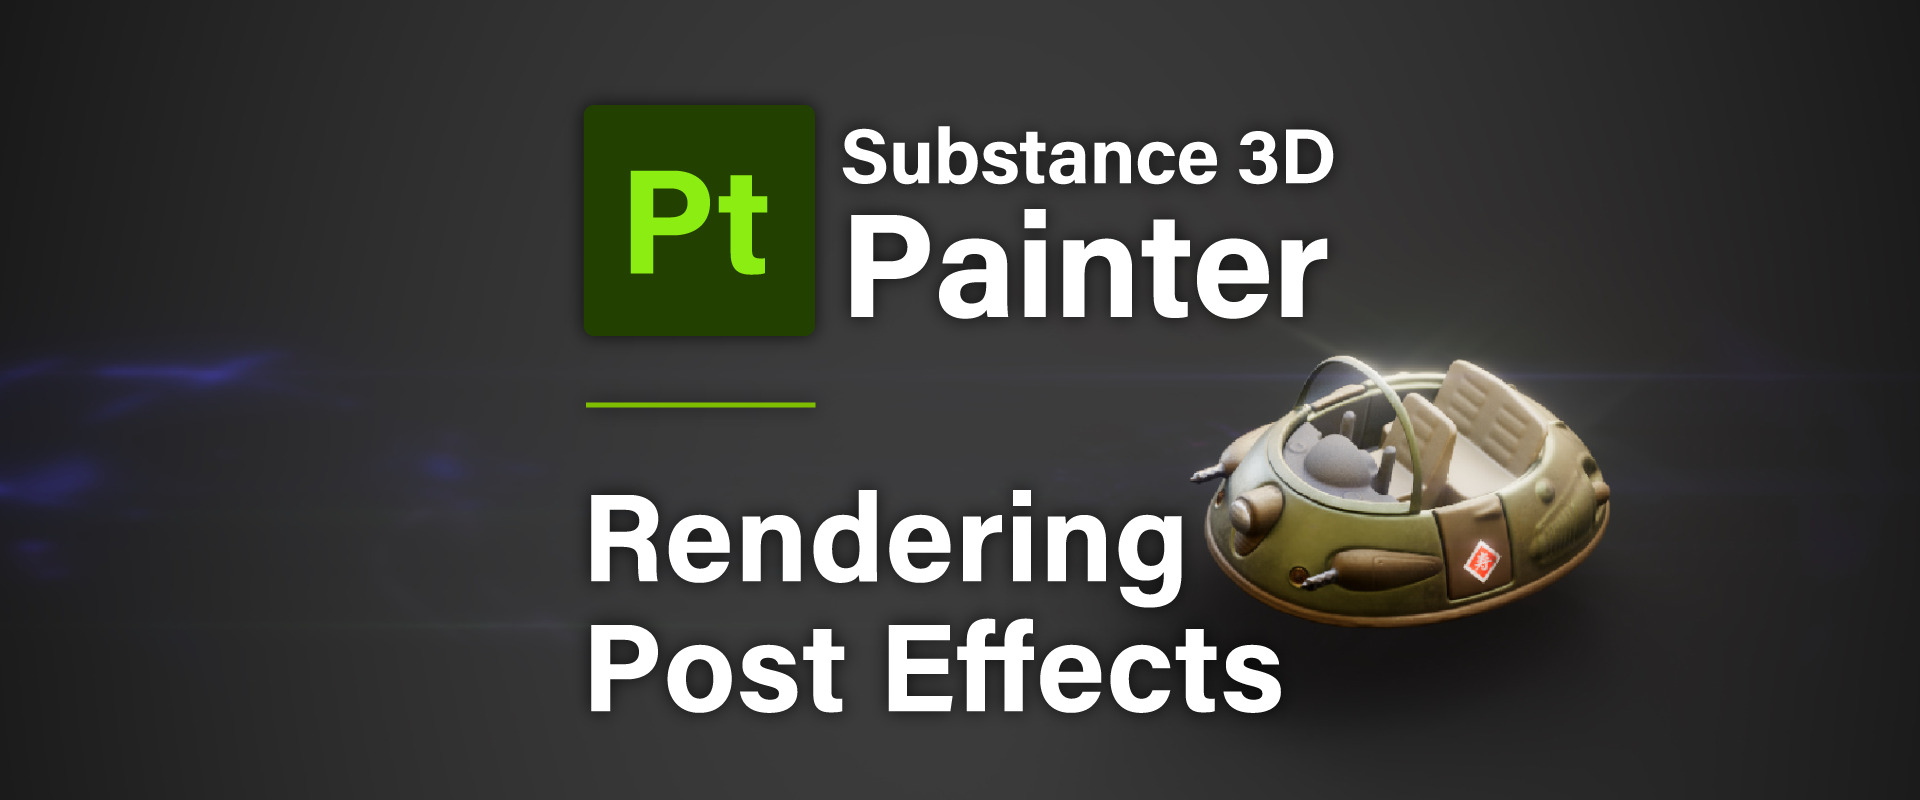 [Substance 3D Painter] Rendering setting items